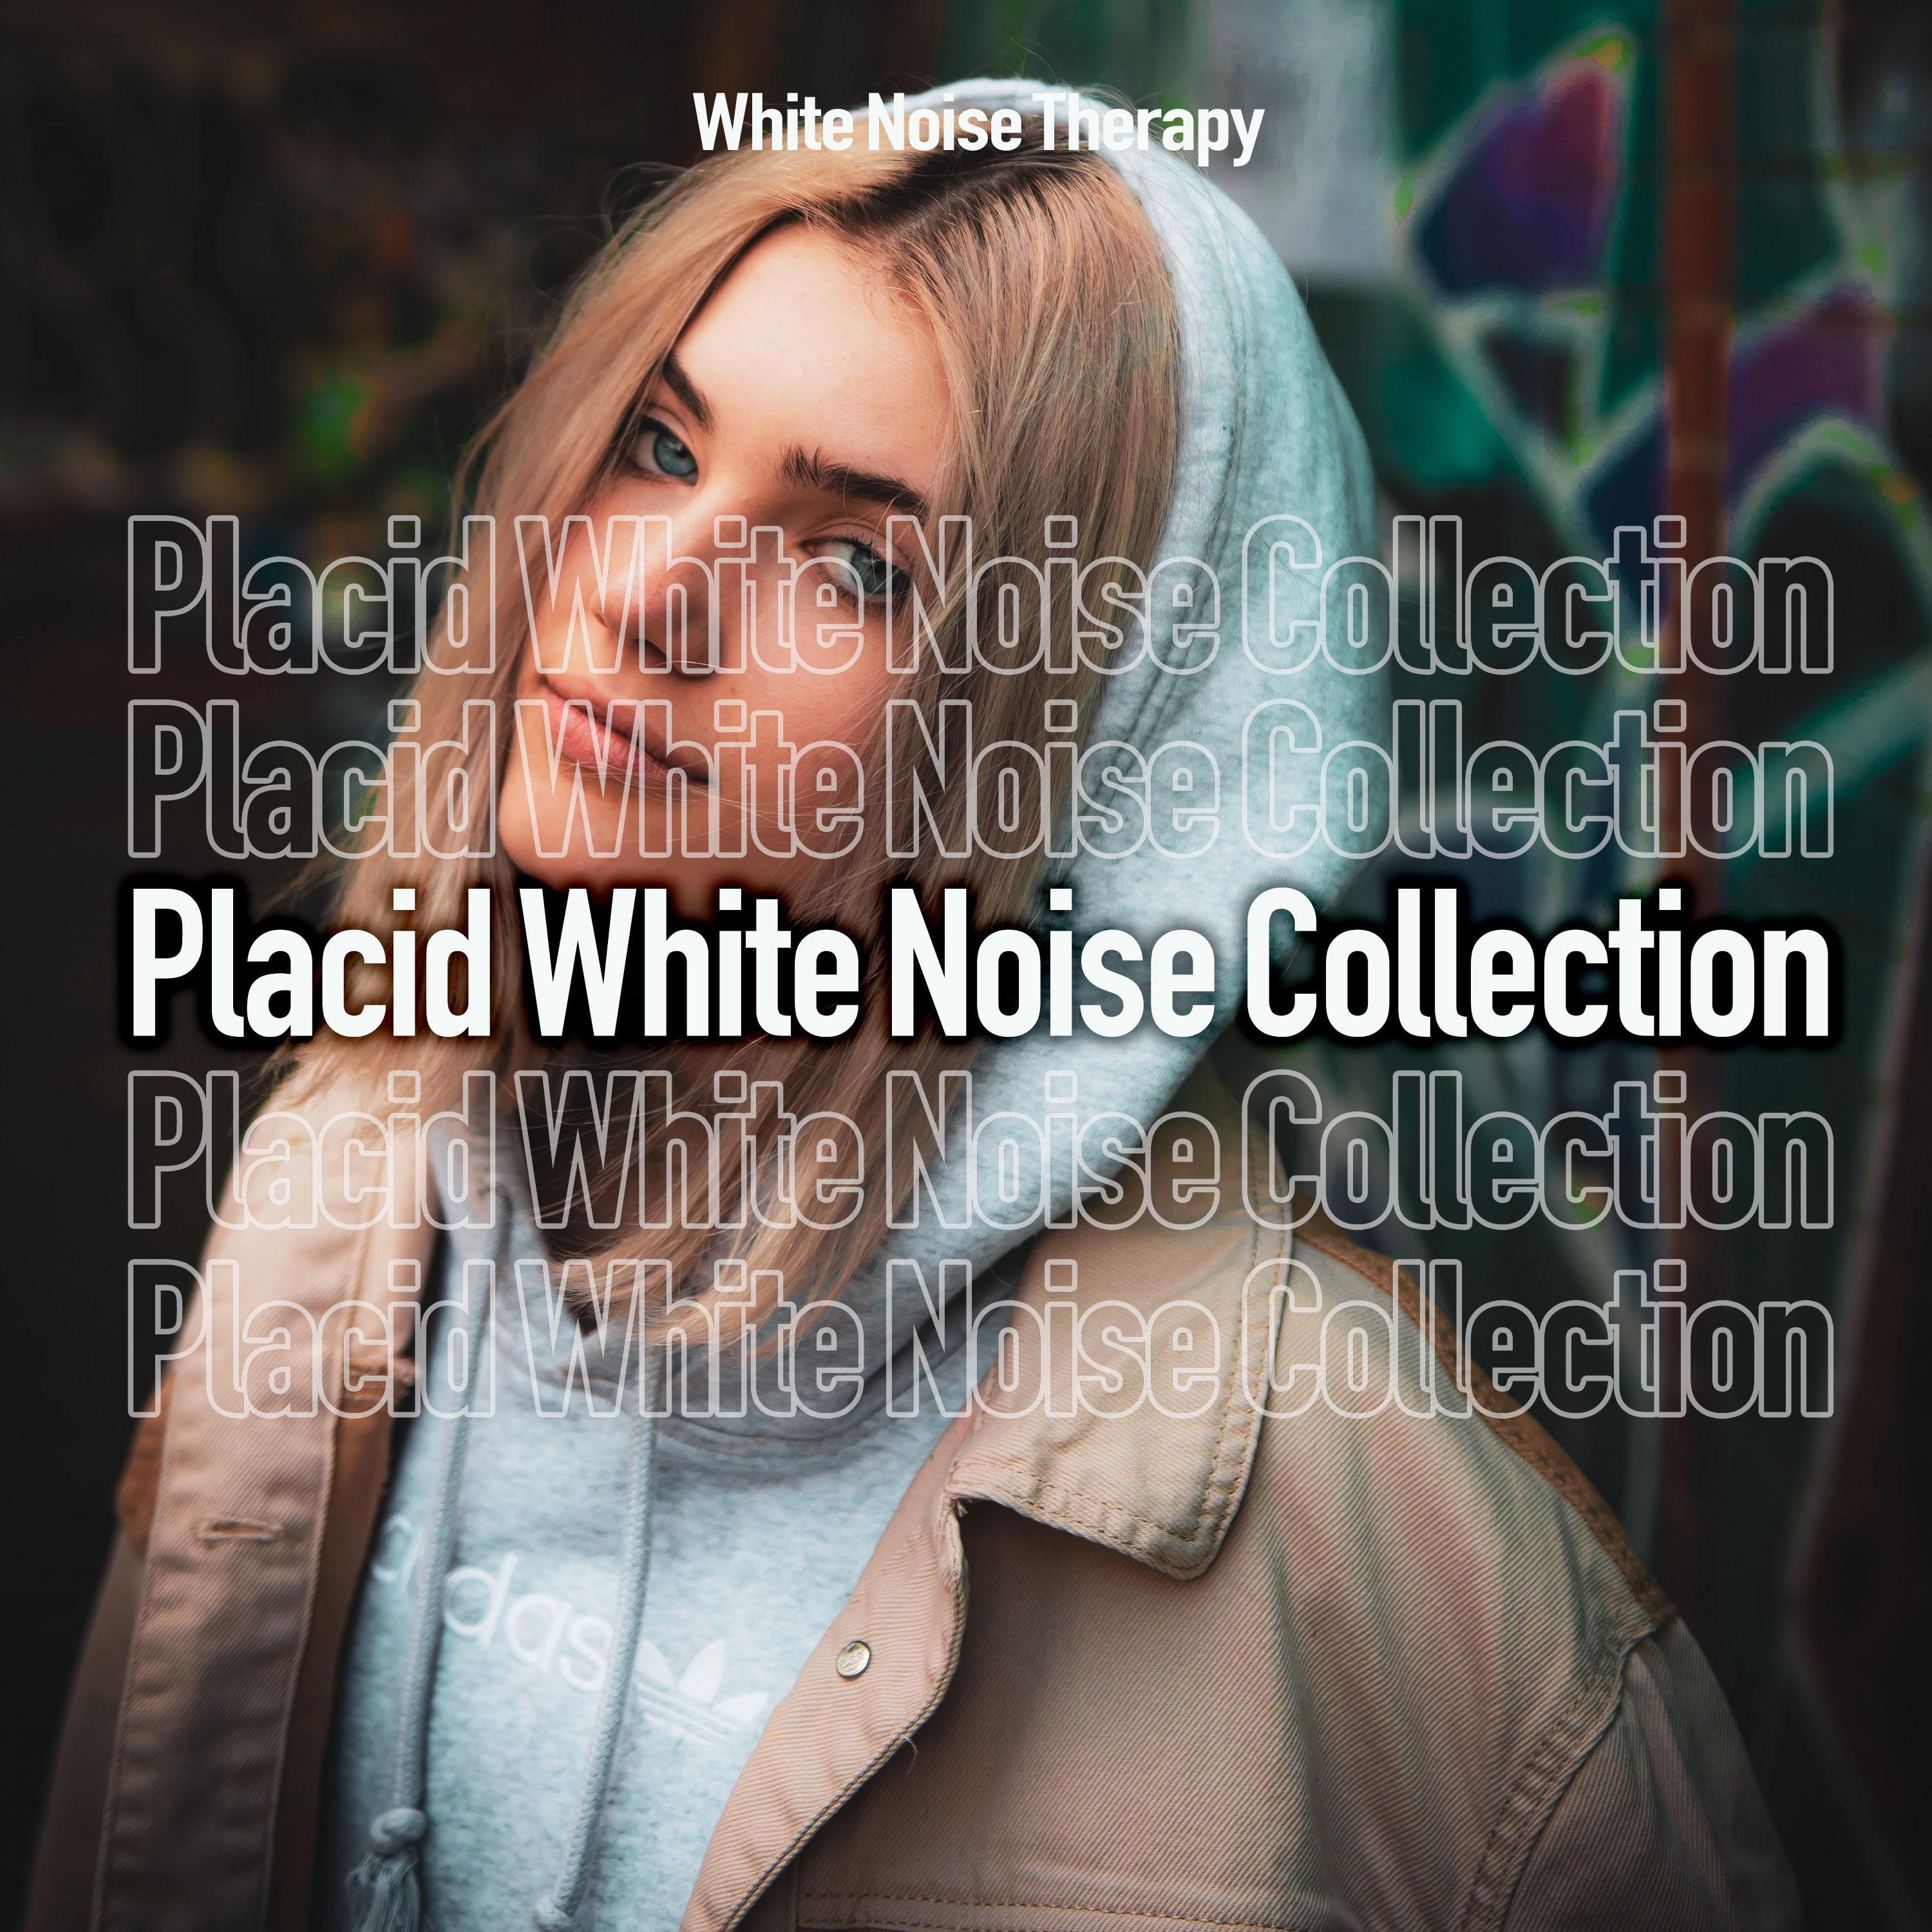 Placid White Noise Collection